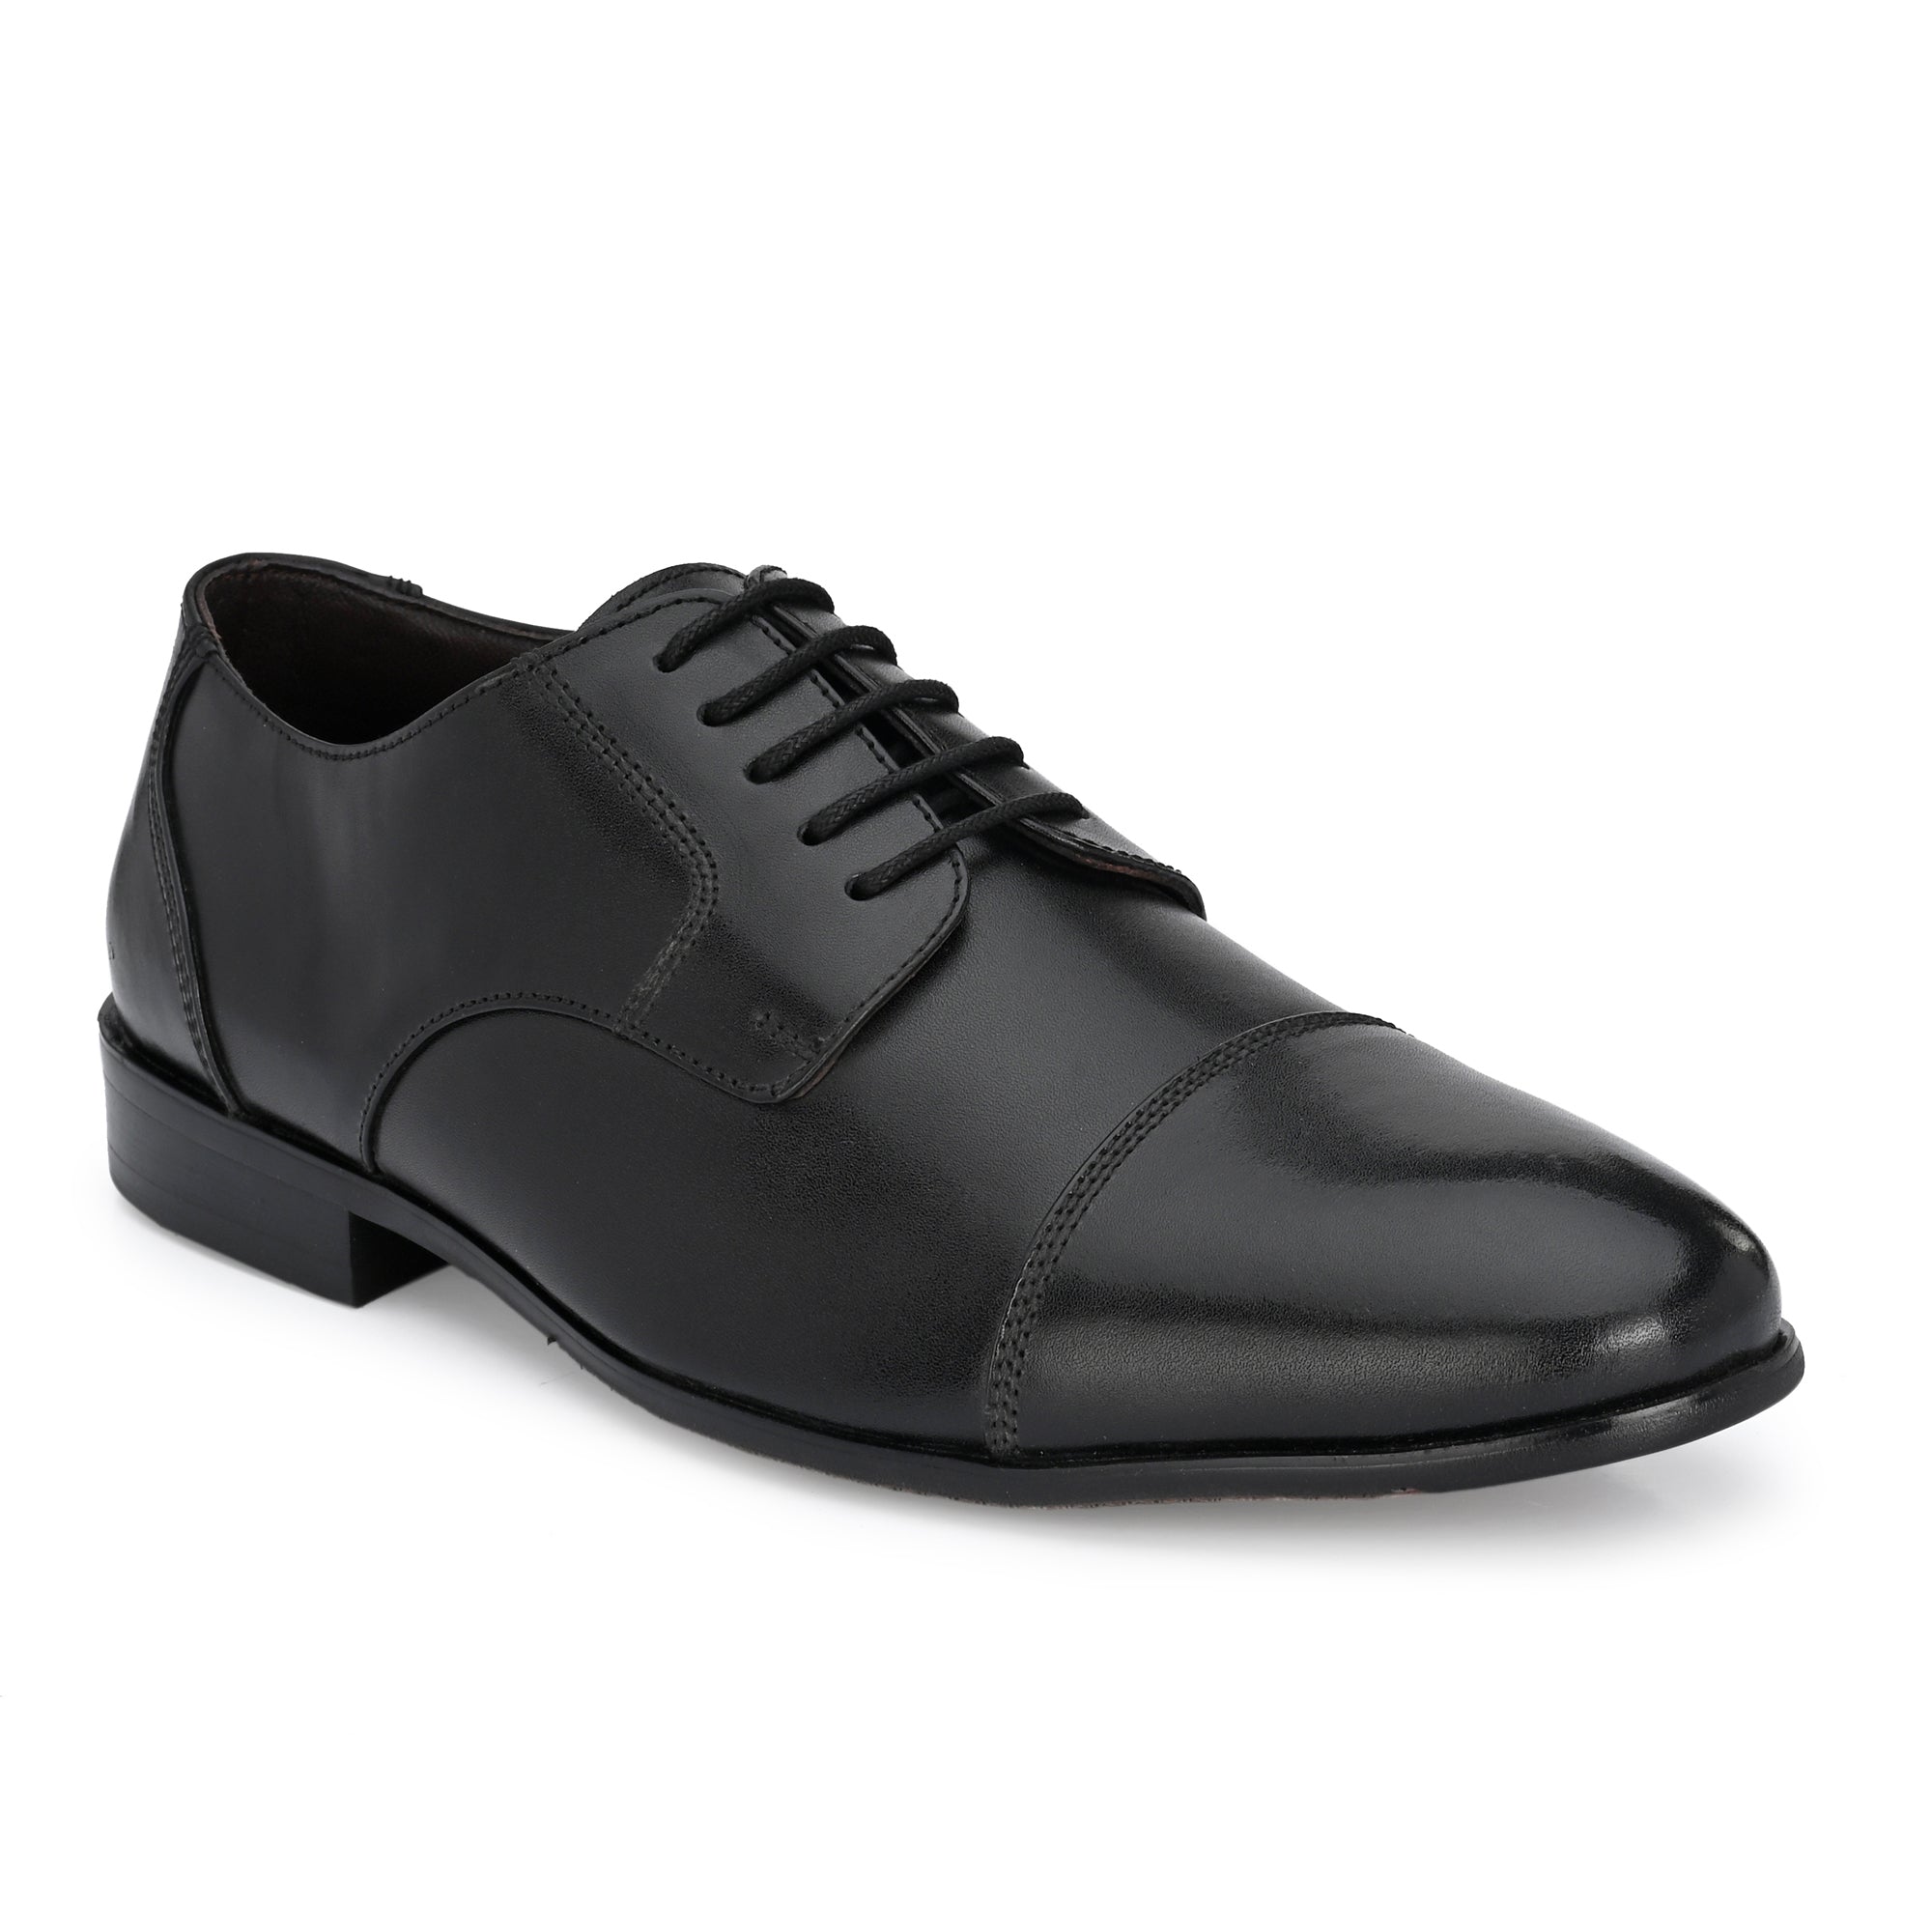 Egoss Premium Formal Leather Shoes for Men with laces